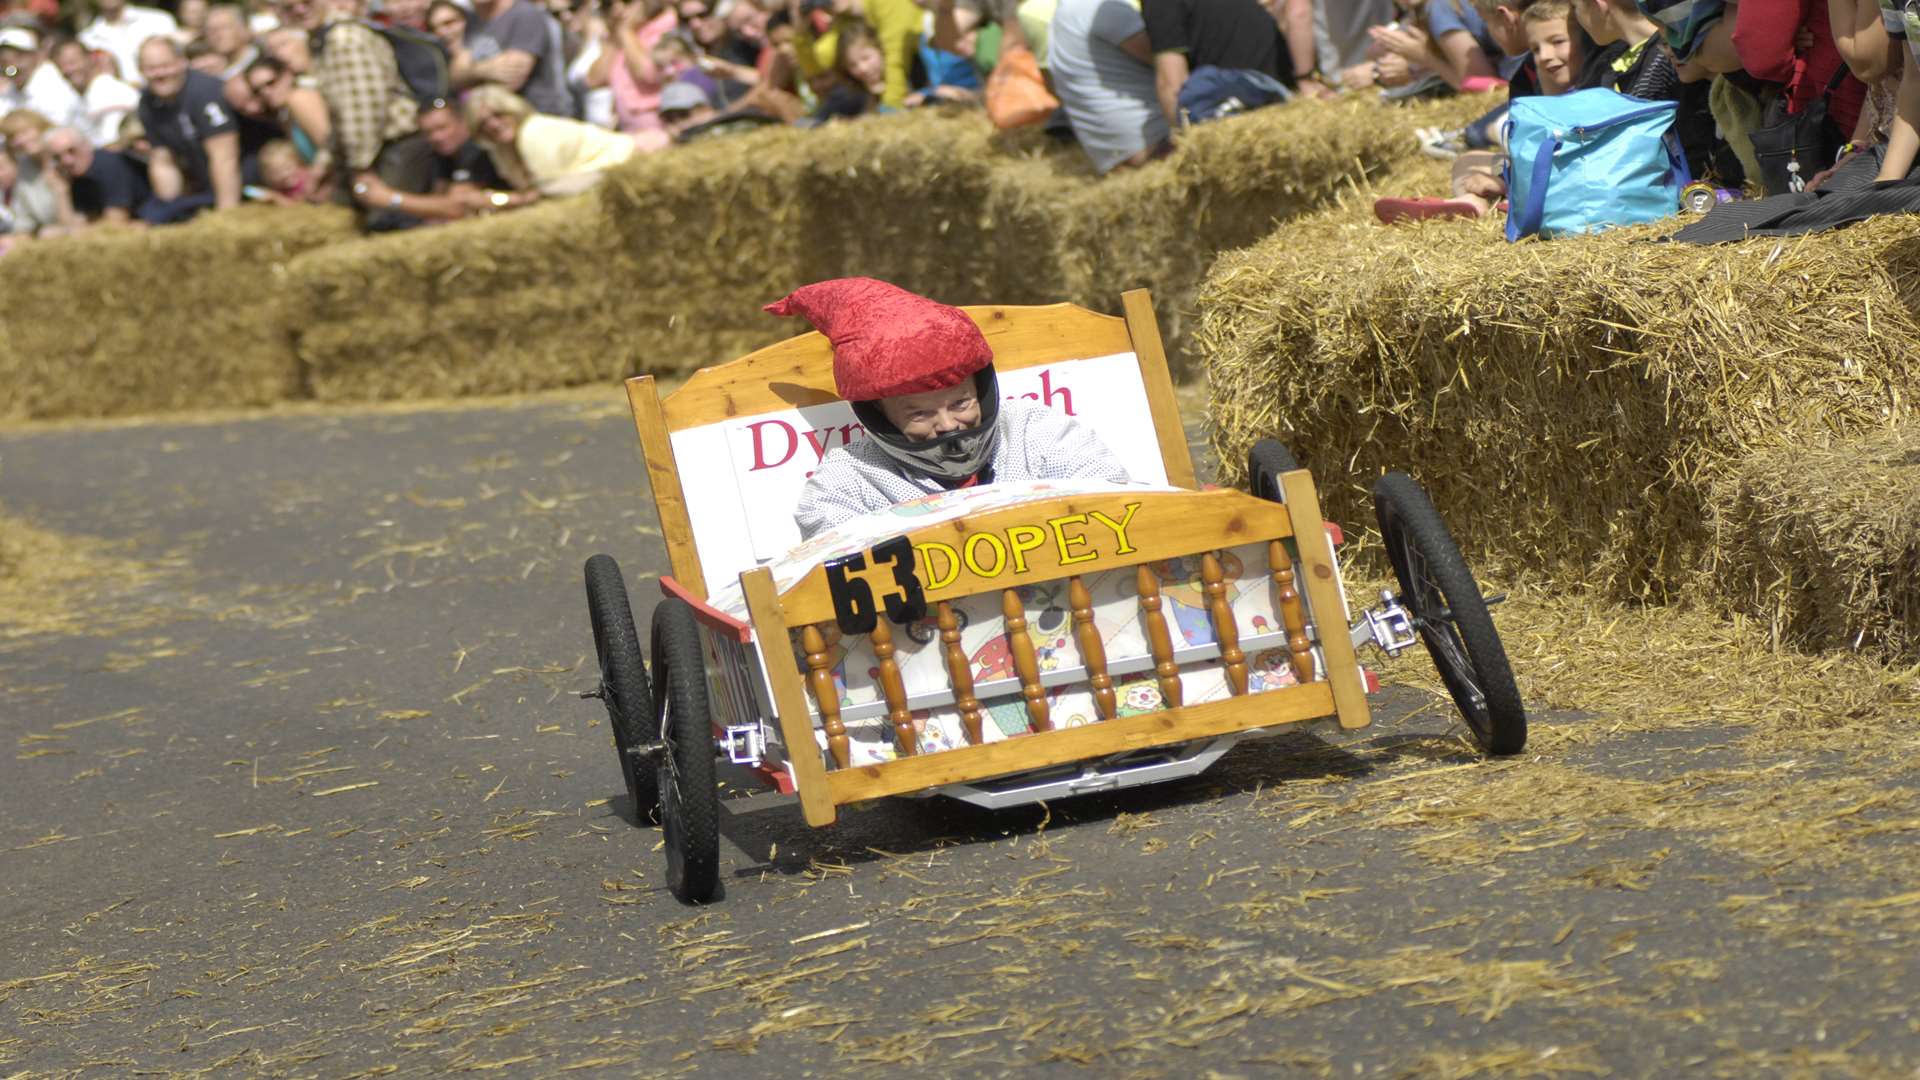 Action from a previous Soapbox Derby